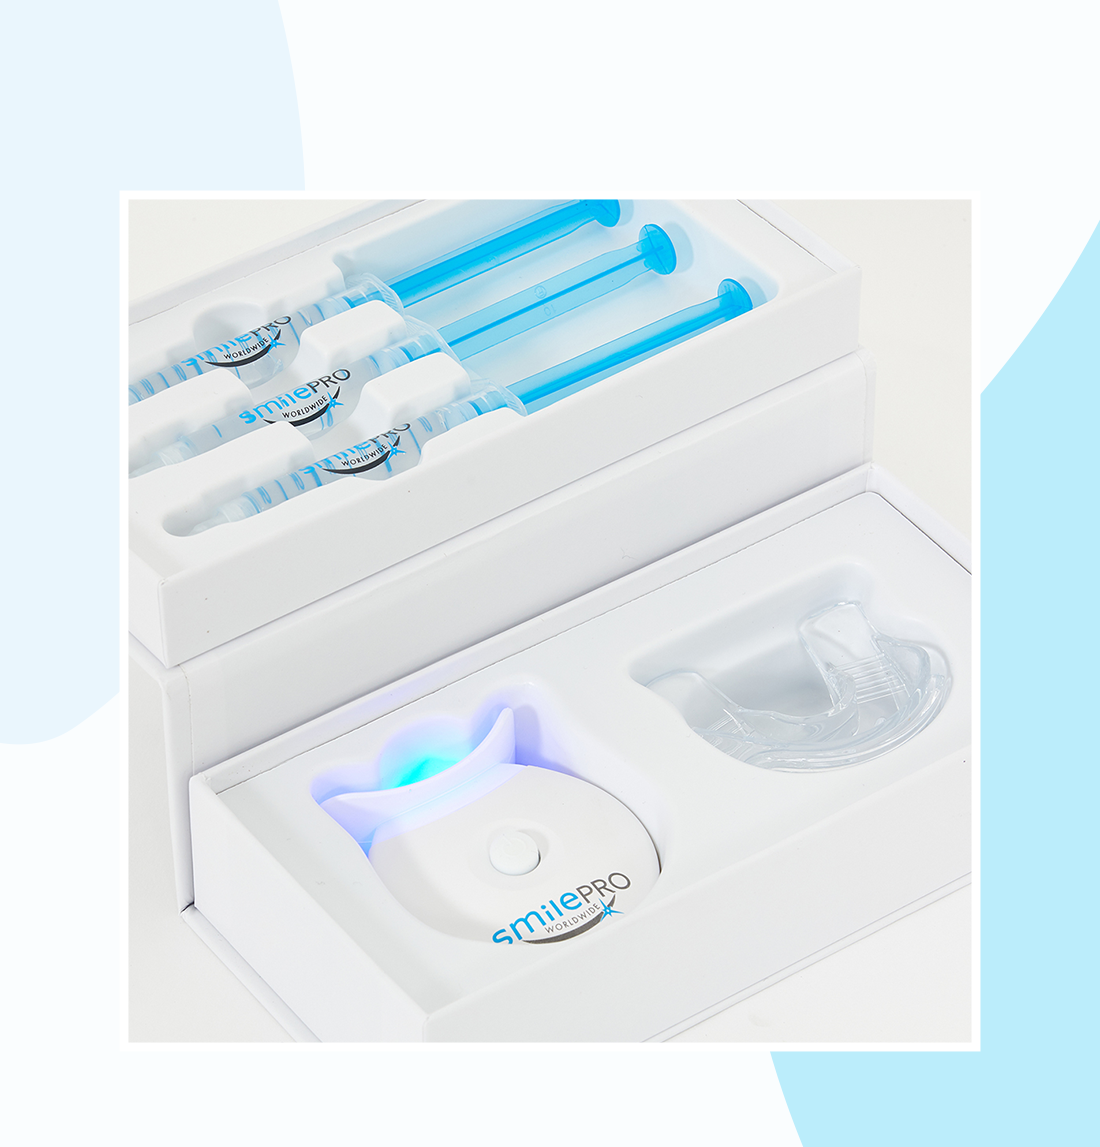 Achieve a brighter smile with SmilePro teeth whitening kit, easy to use and affordable.